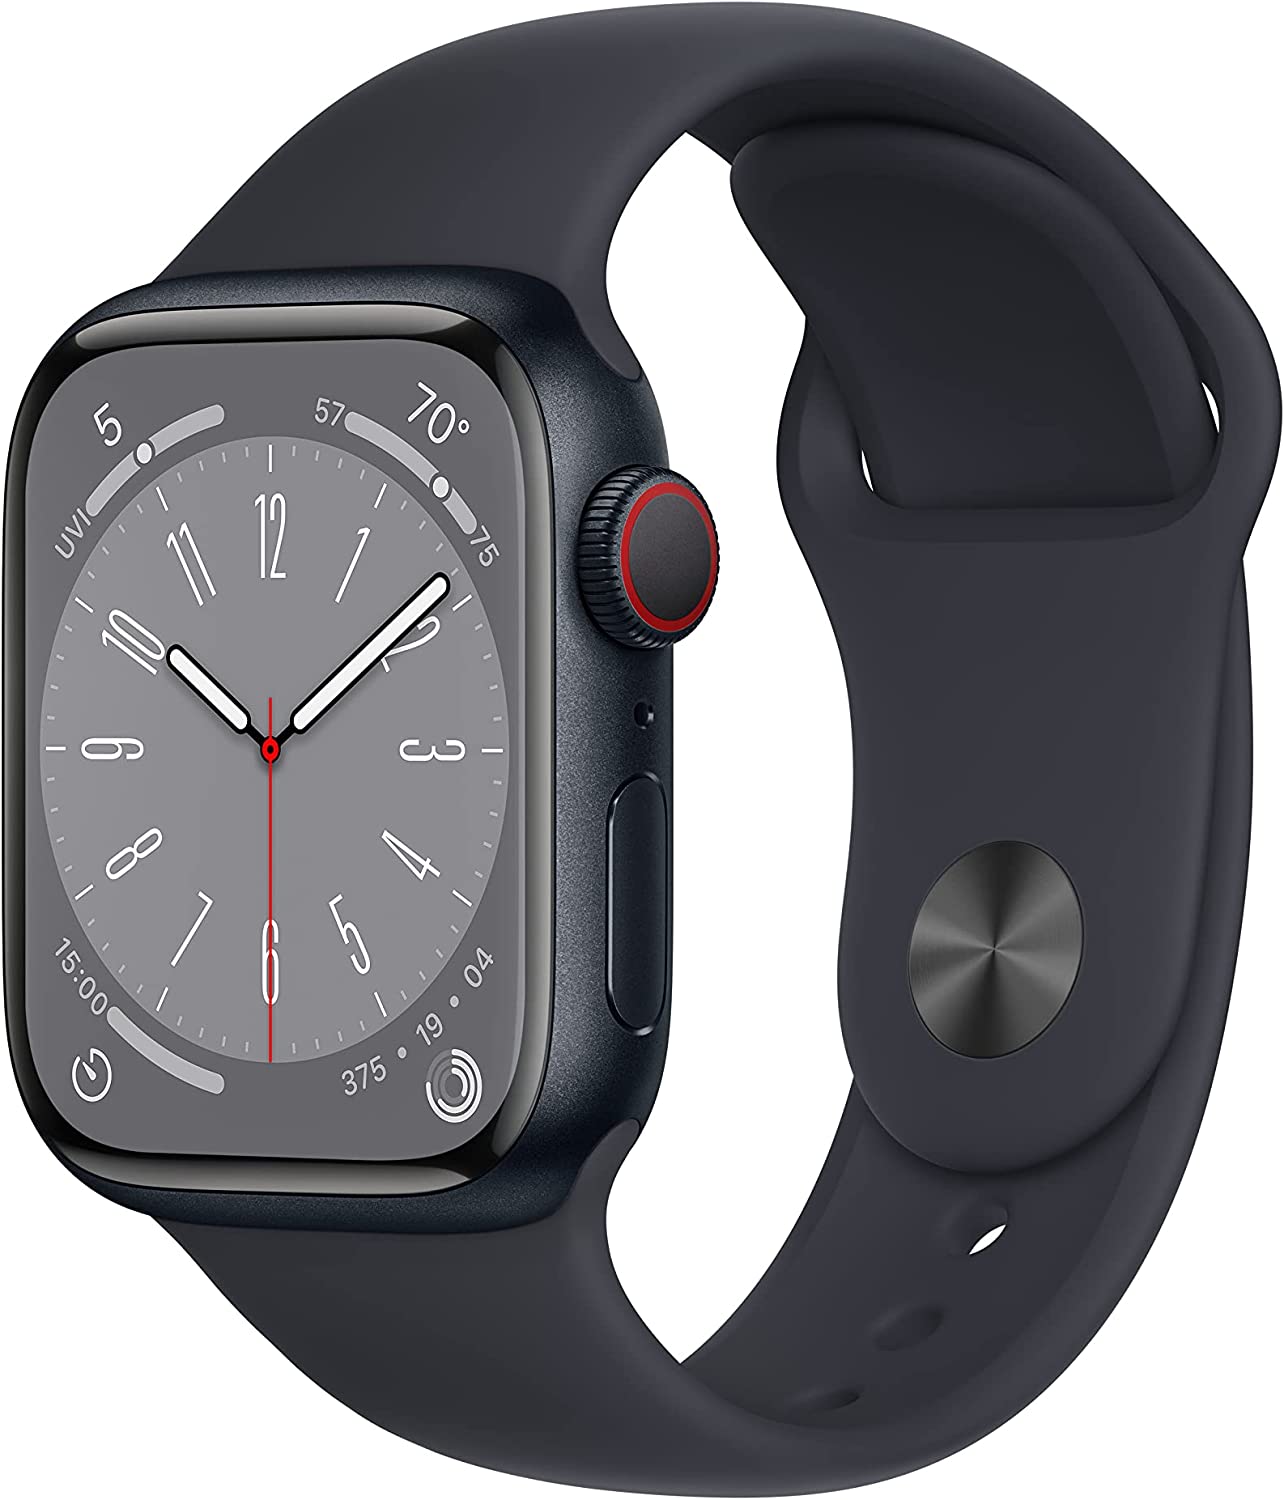 Apple Watch Series 8 with smart features